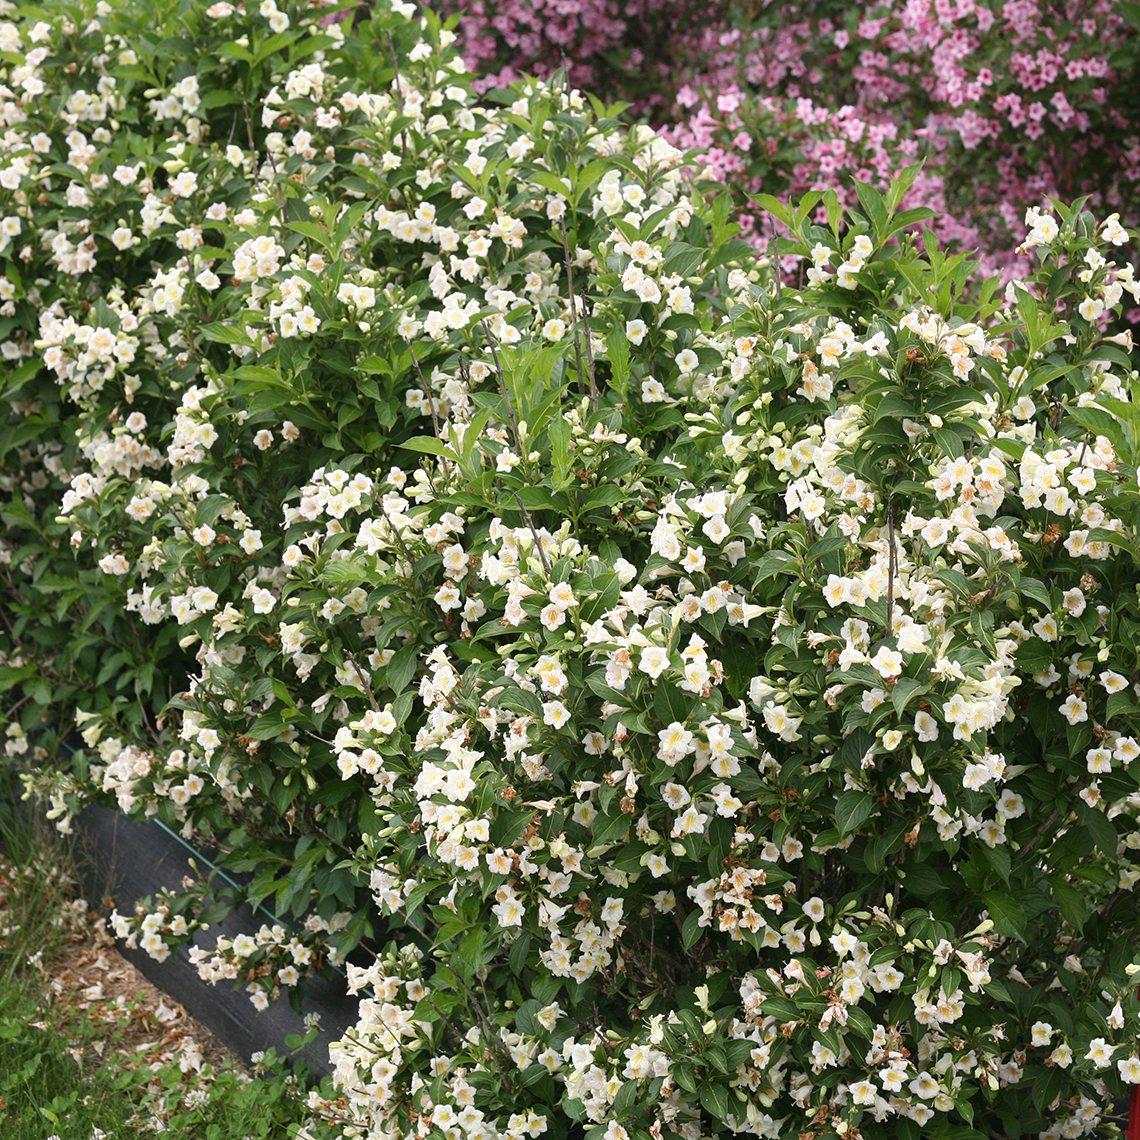 Czechmark Sunny Side Up weigela covered in white flowers in spring